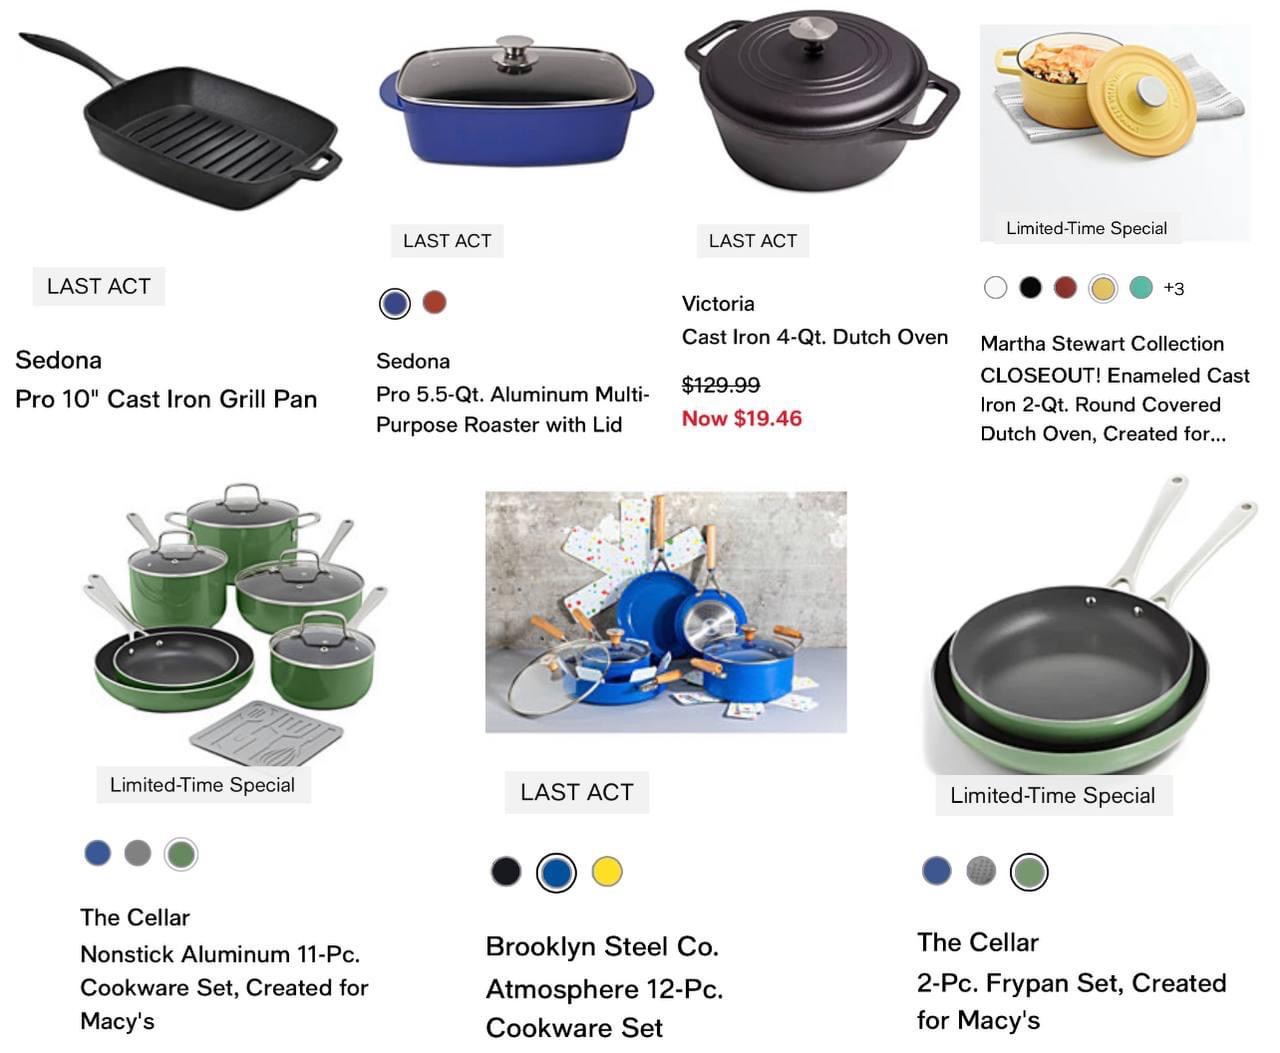 85% Off Tons Of Kitchen Stuff At Macys HURRY ITEMS GOING FAST! ‍ ️
>> https://rstyle.me/+m7pxIExKGu7esZseLBhZzQ